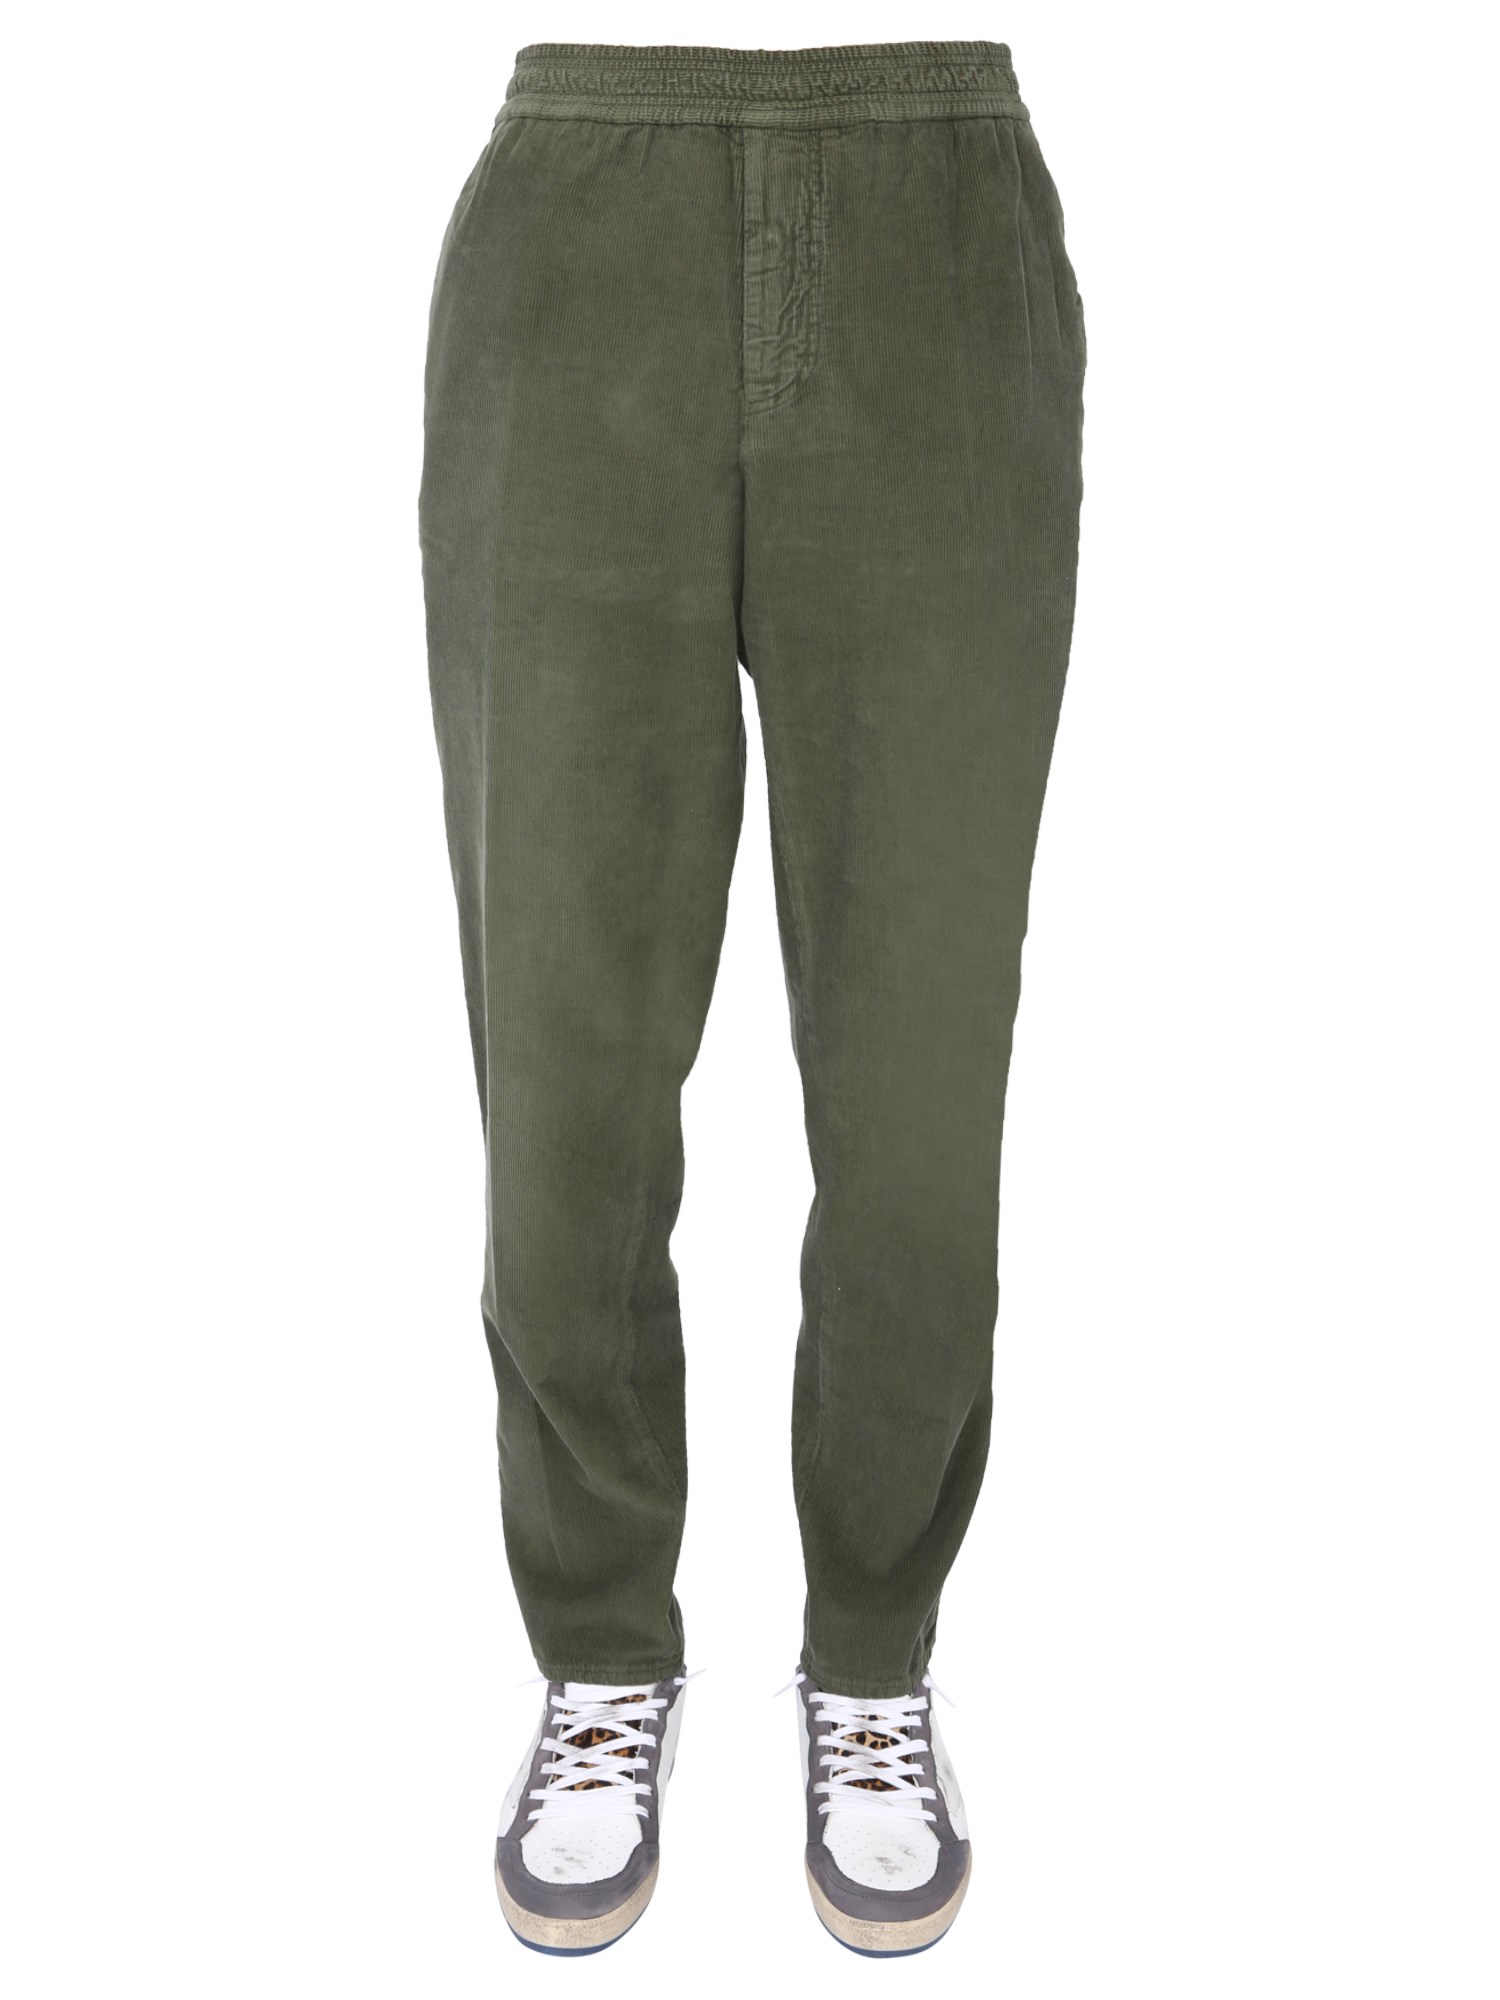 golden goose deluxe brand "amos" jogger pants